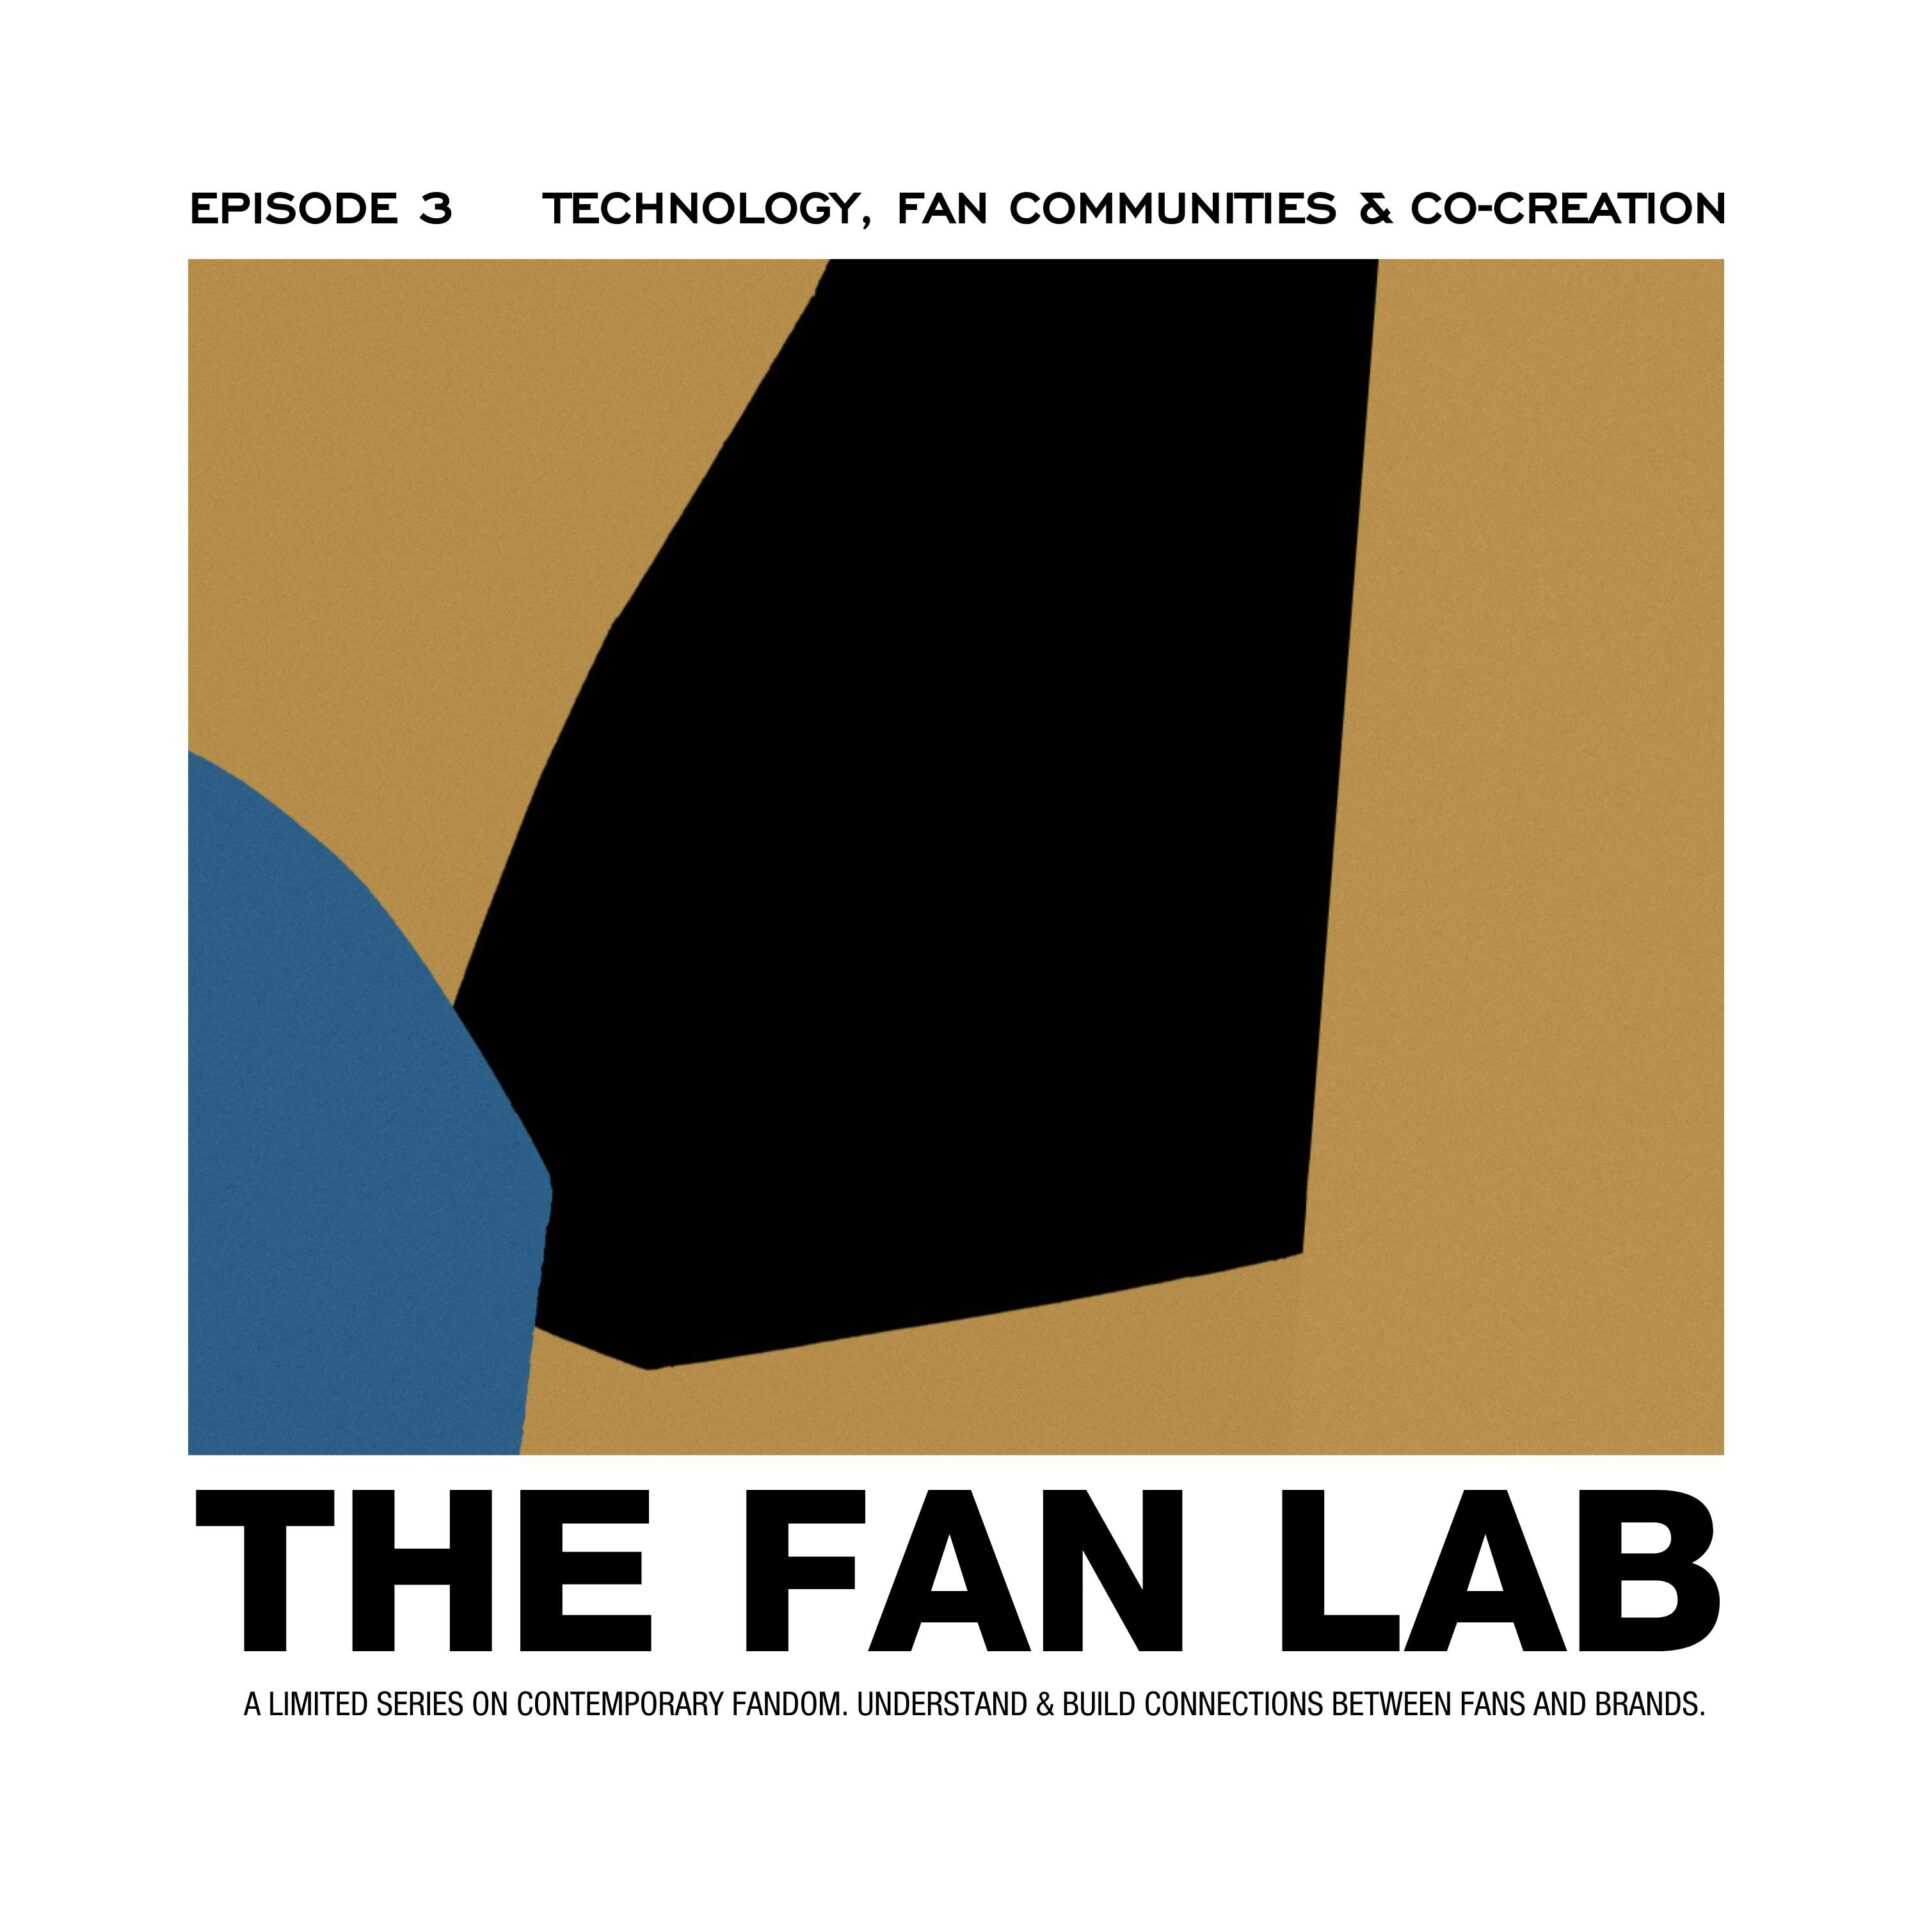 In this episode of the fan lab, Jonathan Hanson speaks with Vox media reporter, Aja Romano about fan communities, tech, AI and authenticity.